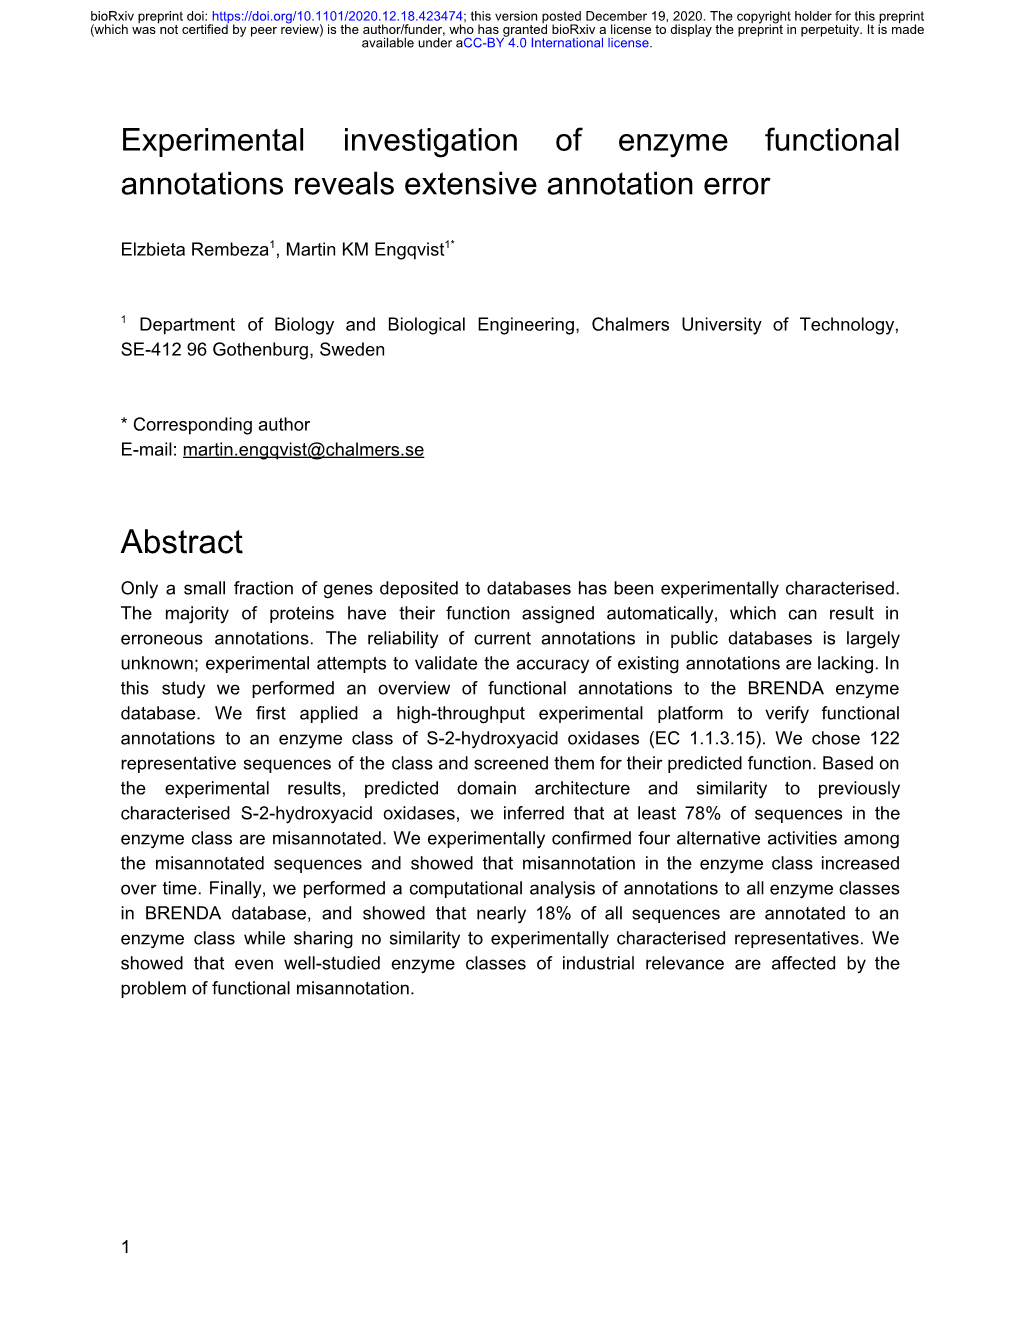 Experimental Investigation of Enzyme Functional Annotations Reveals Extensive Annotation Error